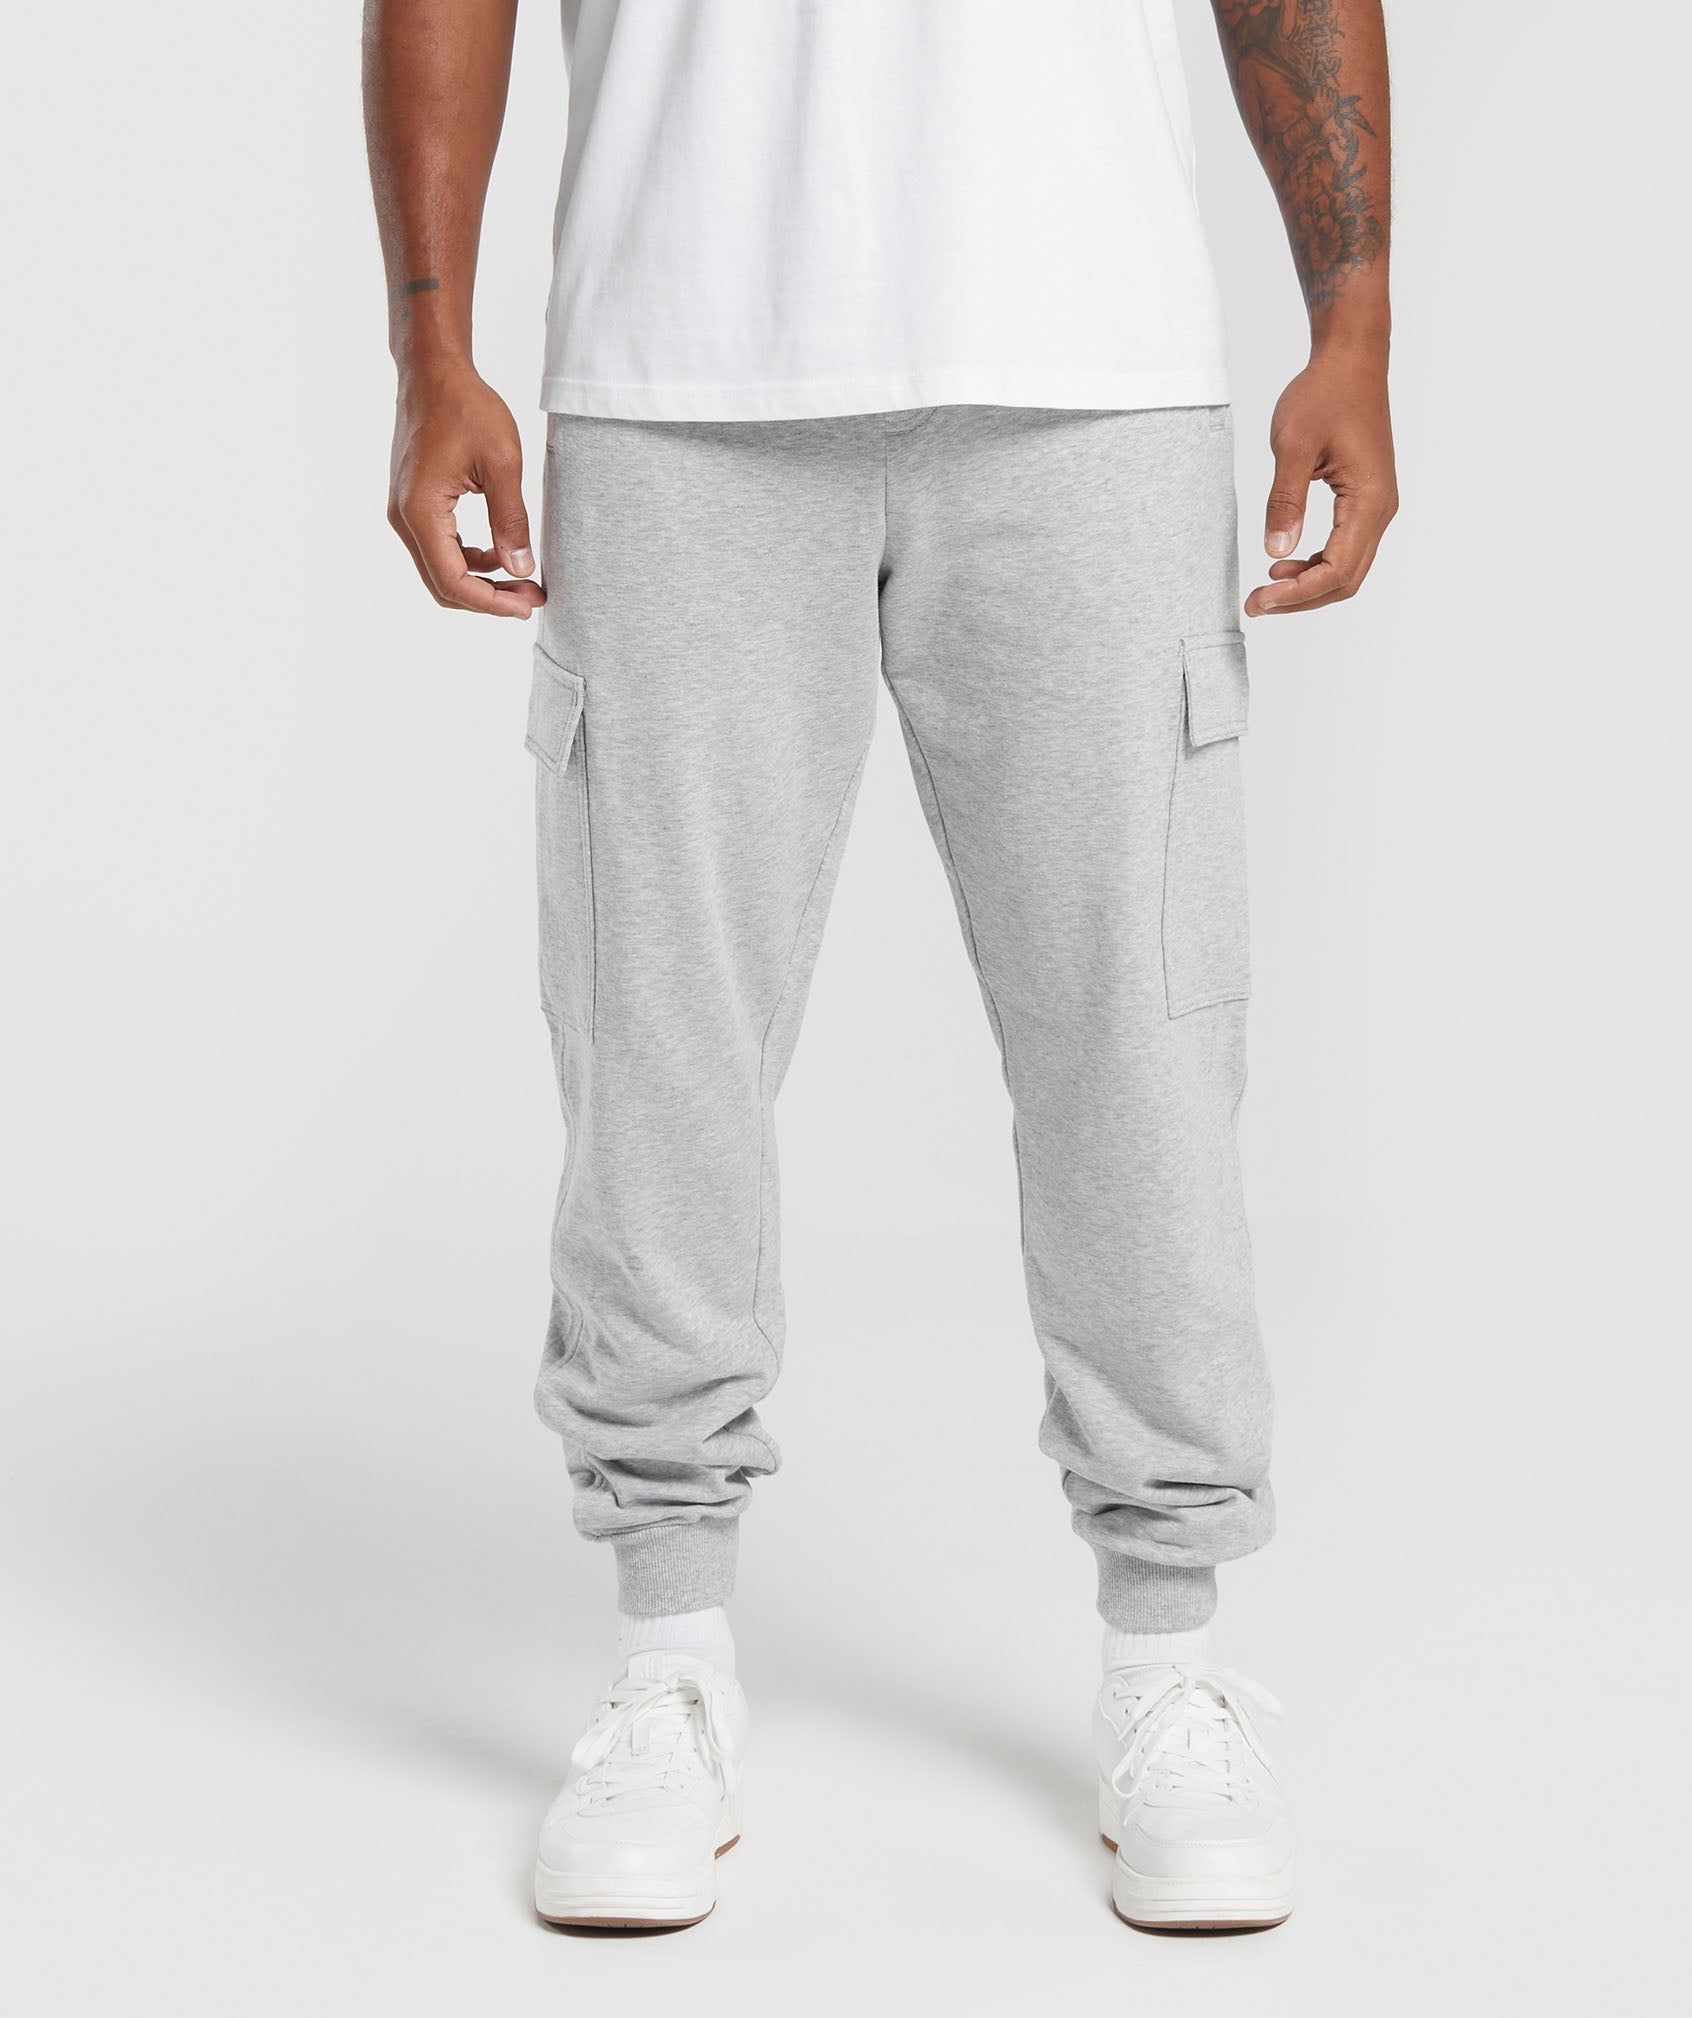 Rest Day Essentials Cargo Joggers in Light Grey Core Marl - view 1